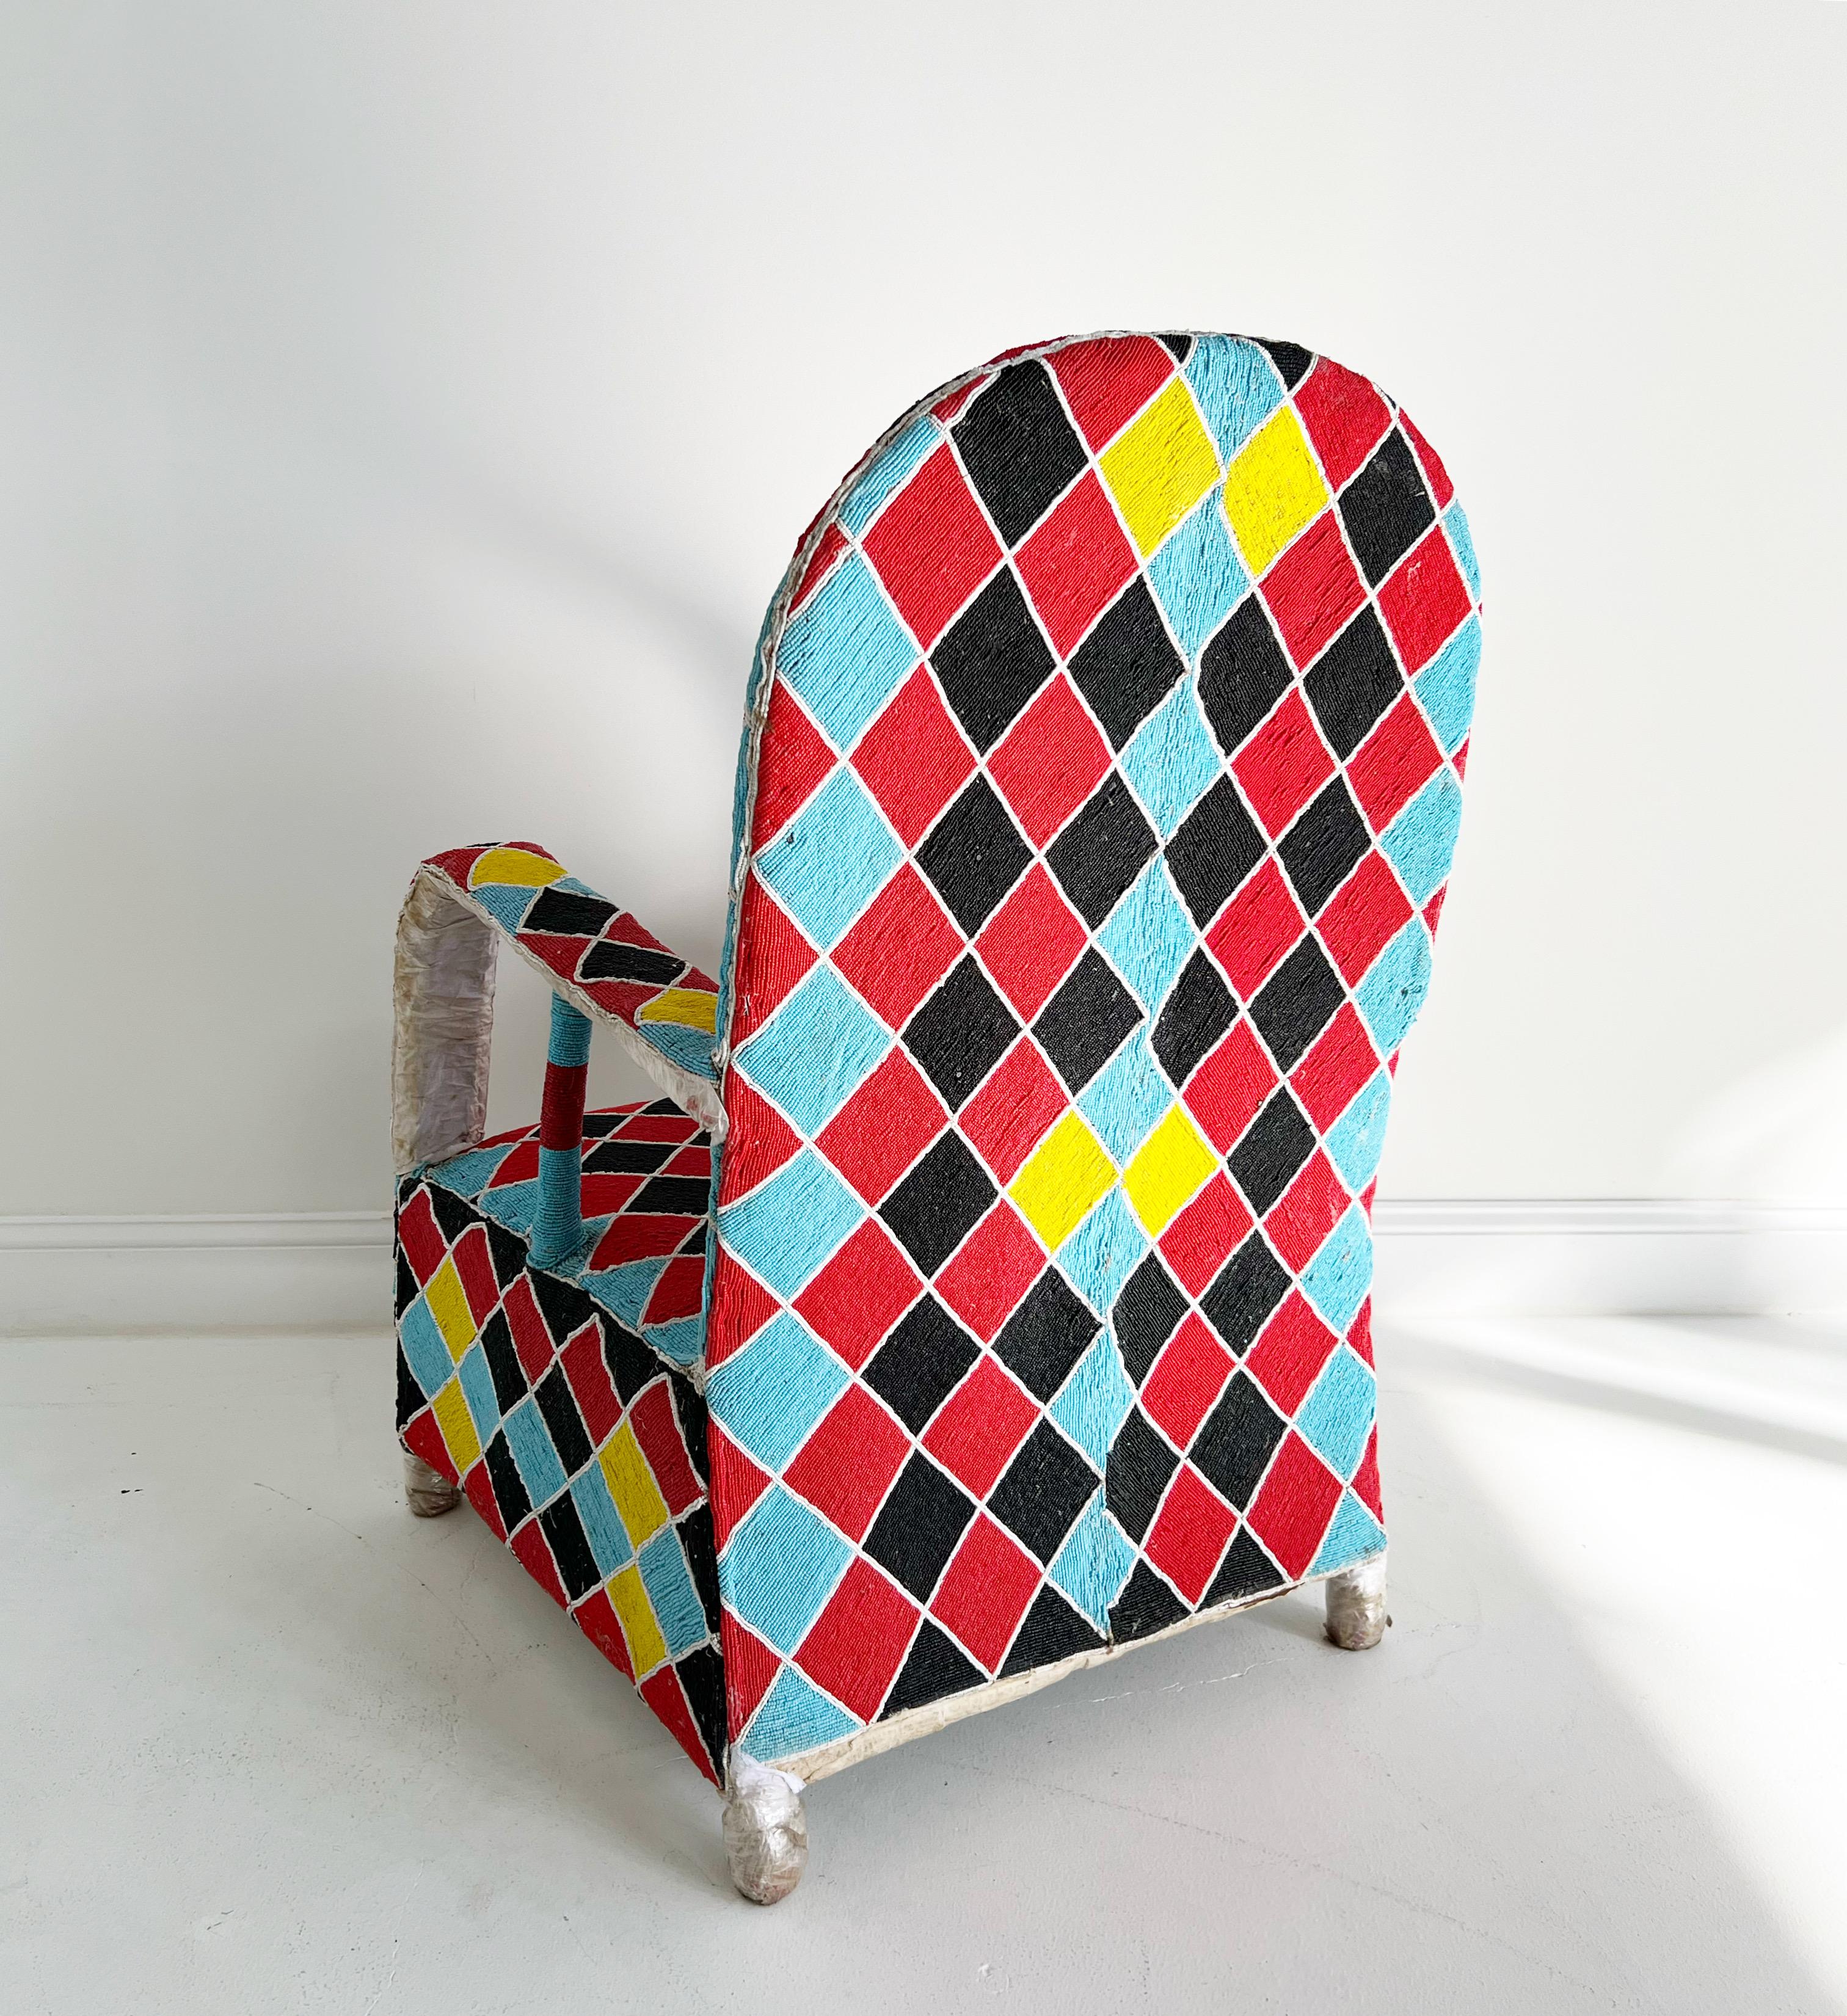 Description
Originally hand-crafted for the Nigerian Yoruba tribe kings and queens, each chair takes approximately 3 months to make. Thousands of tiny glass beads are intricately applied to canvas fabric in beautiful shapes and designs. The fabric